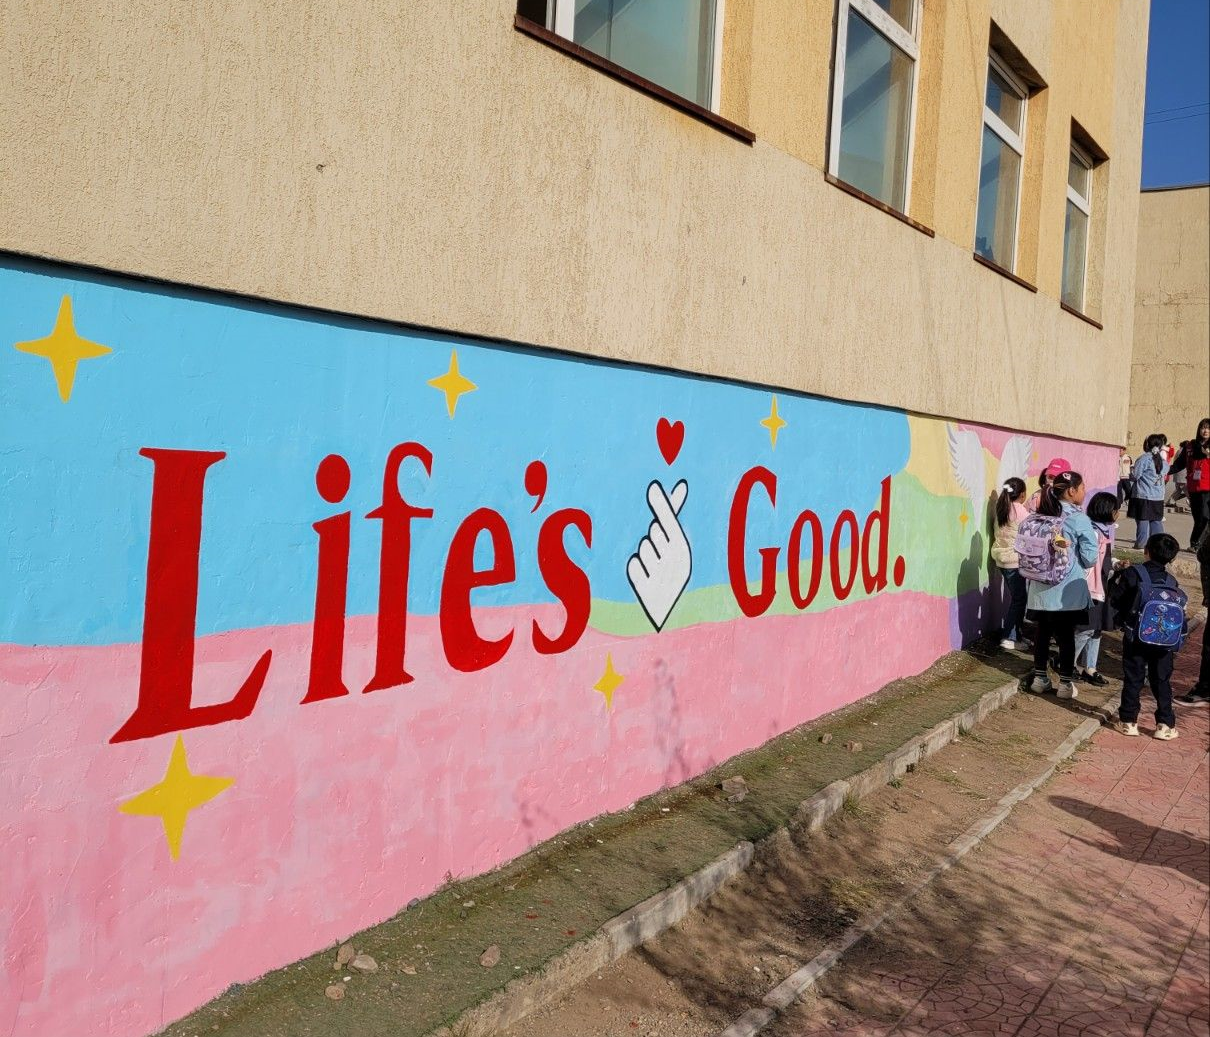 A wall painted by LG Life's Good Volunteers